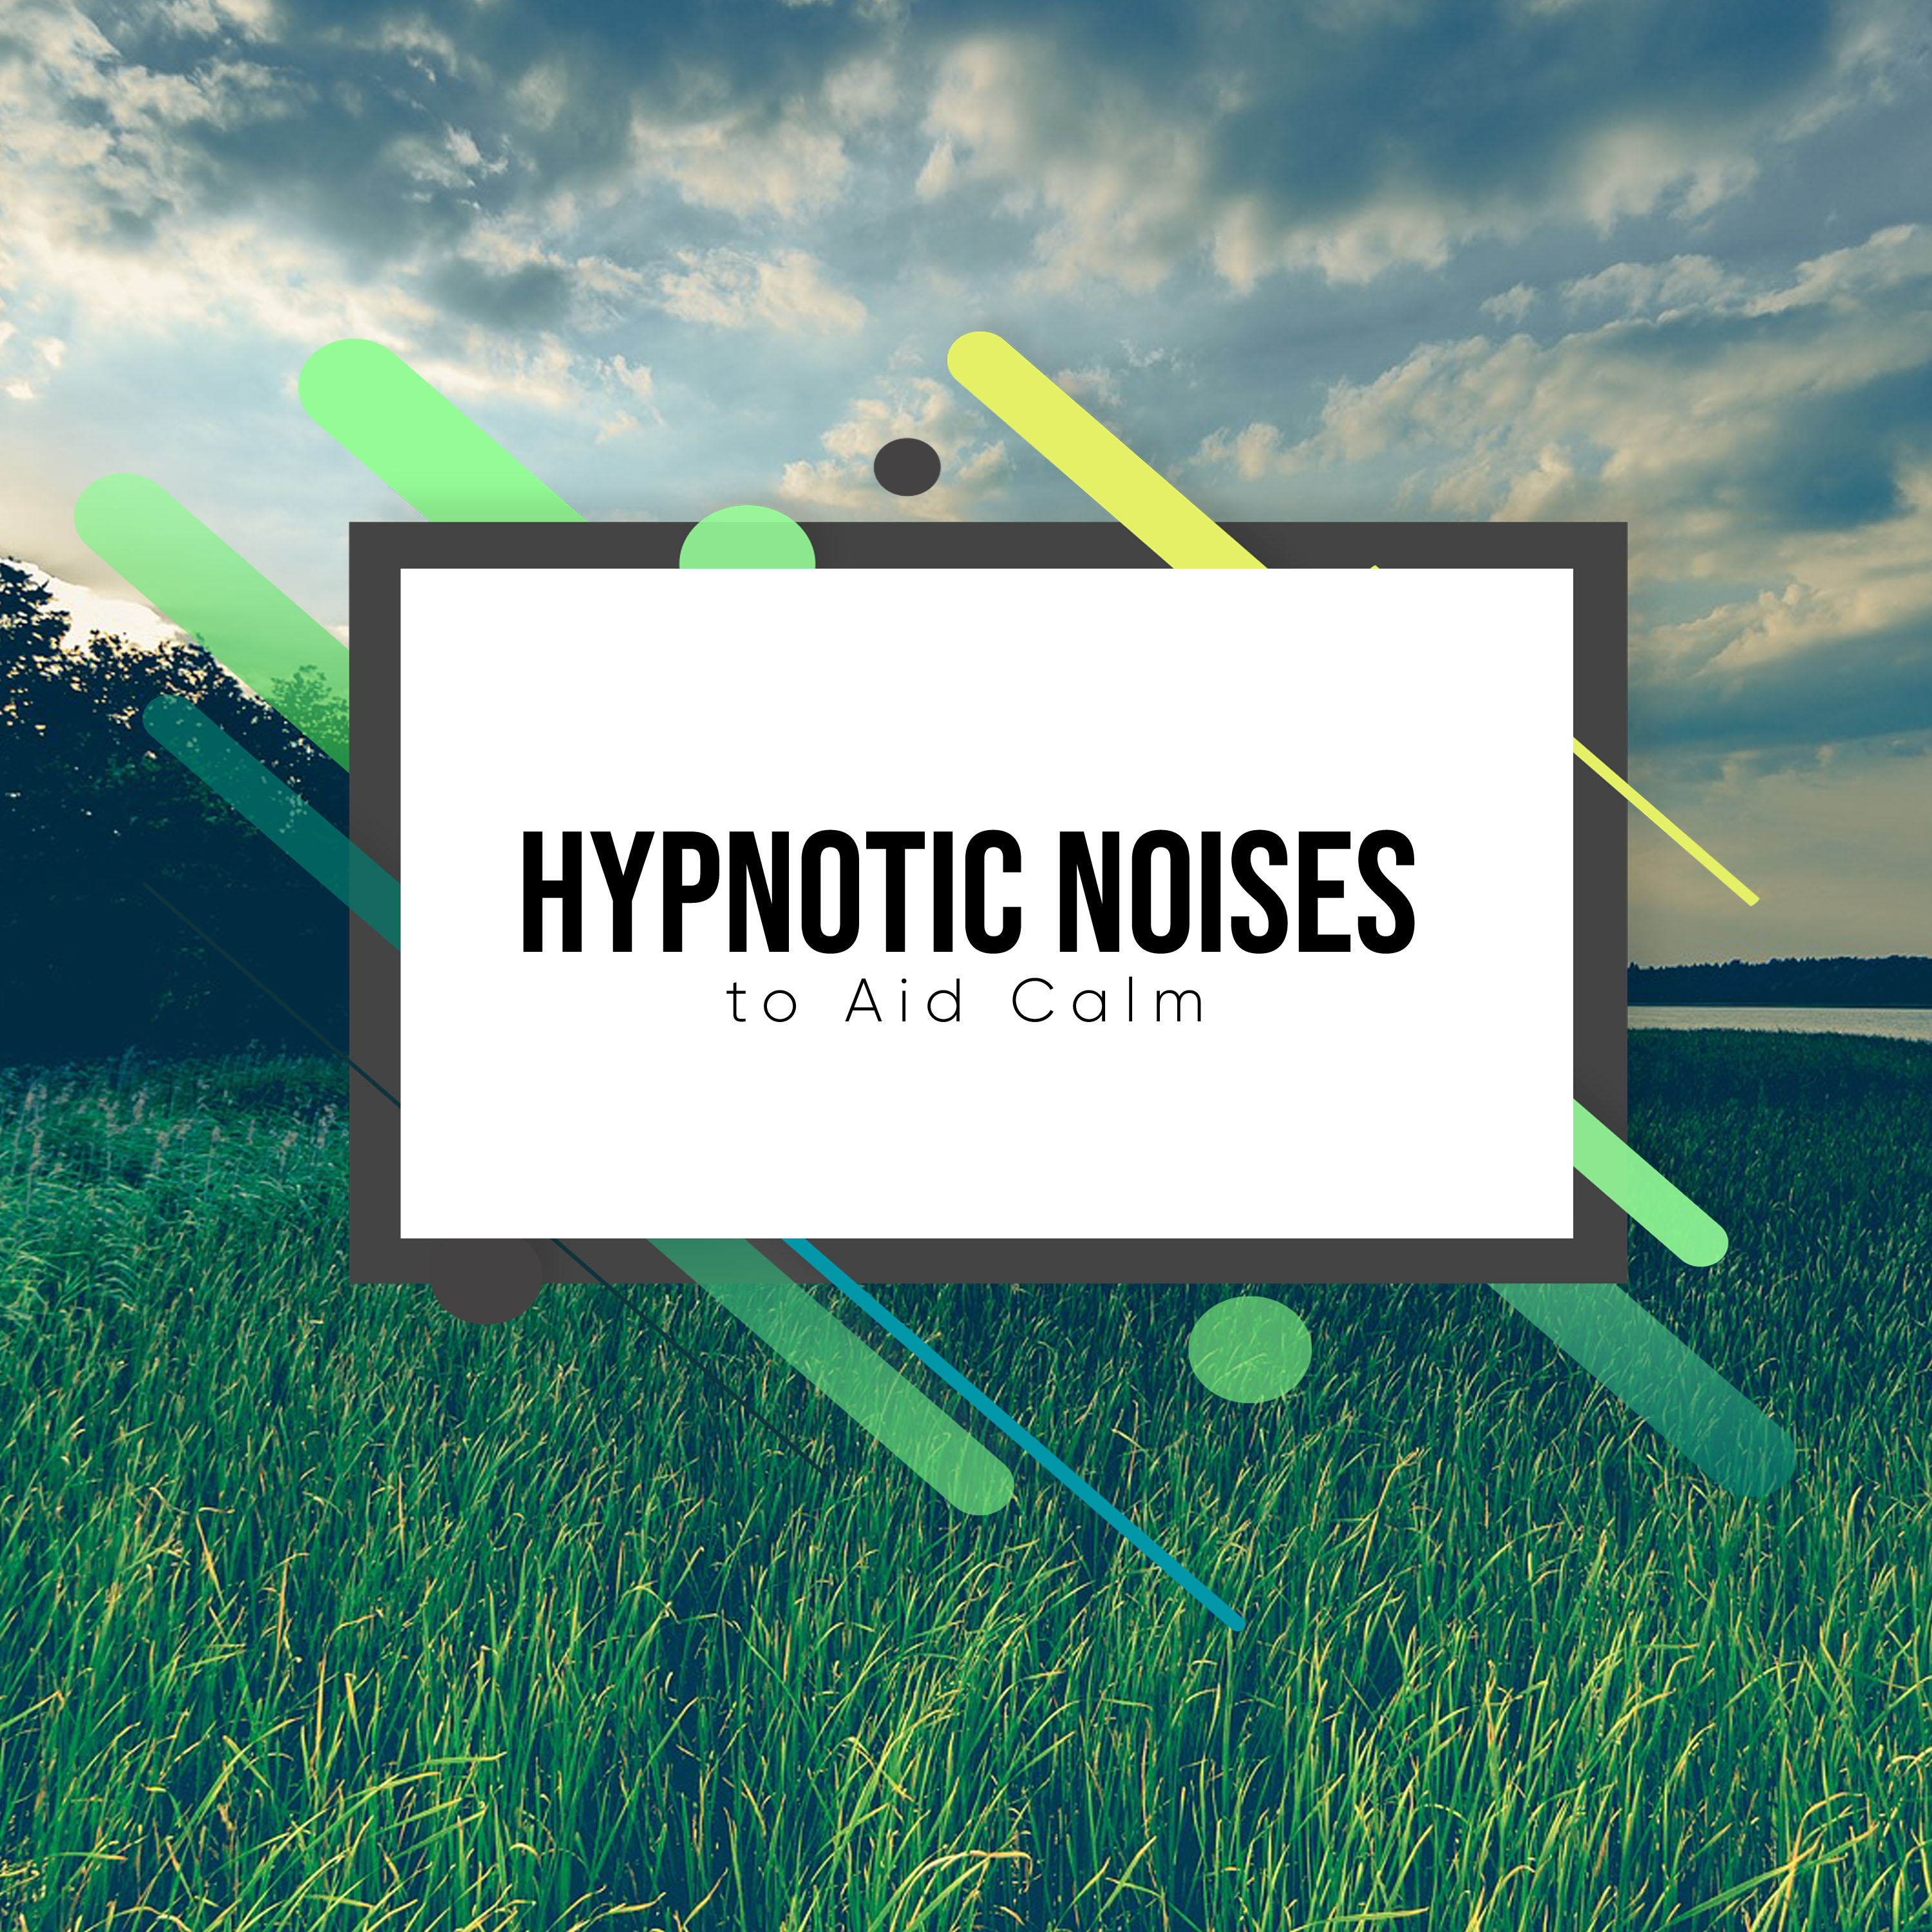 #15 Hypnotic Noises to Aid Calm and Relaxation